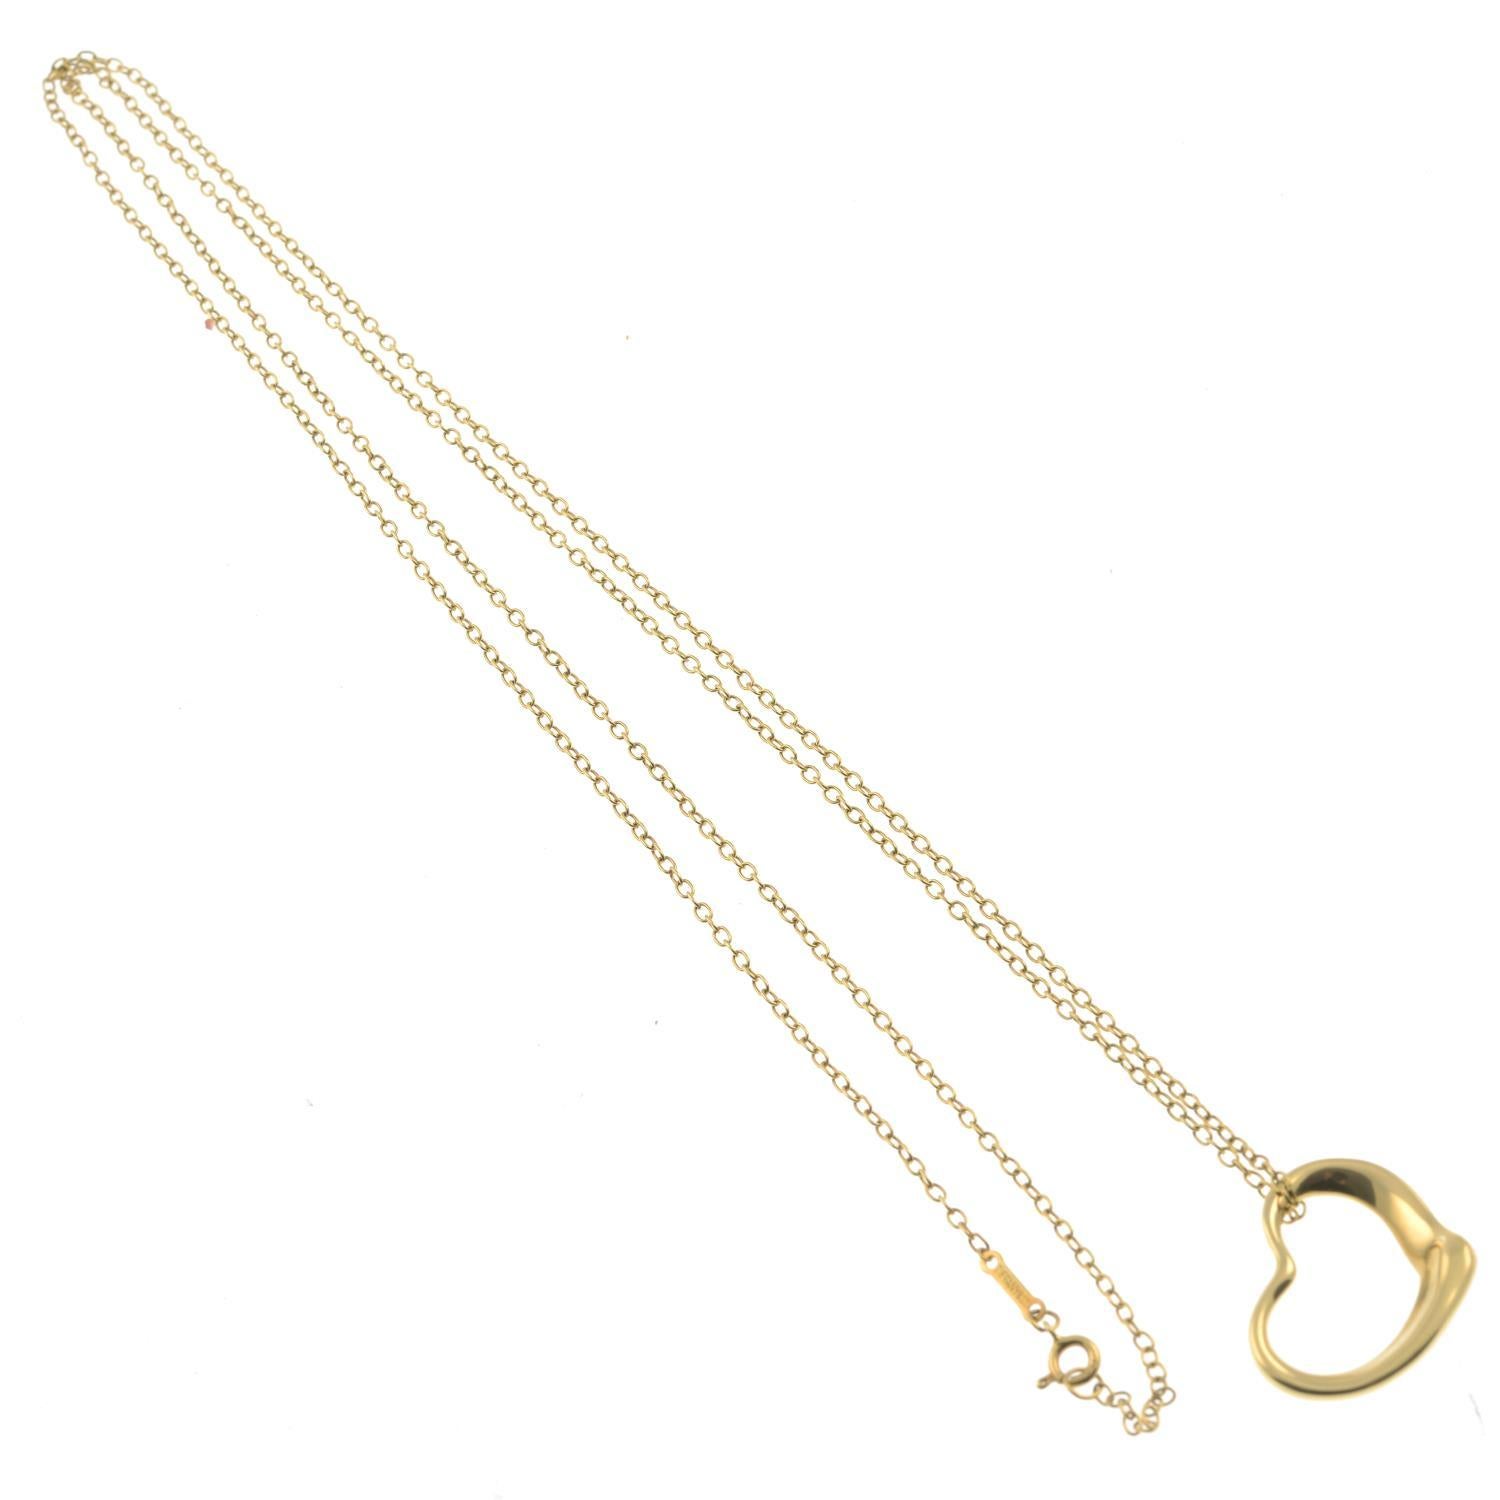 Signed Tiffany & Co, Peretti. Pendant stamped 18K. Clasp stamped 750. Length of pendant 2.3cms, Length of chain 77cms. 7.9gms